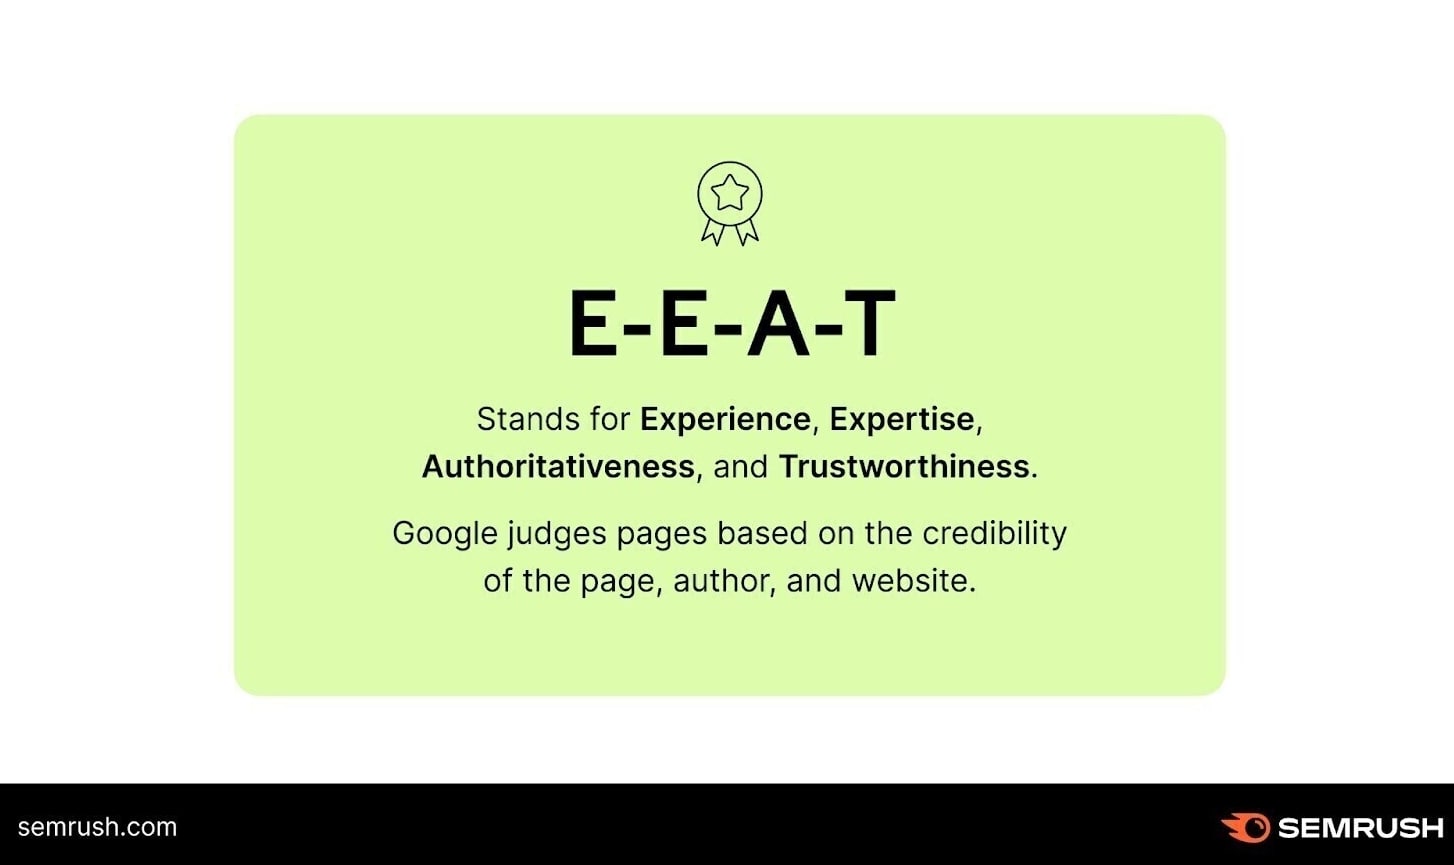 What E-E-A-T stands for